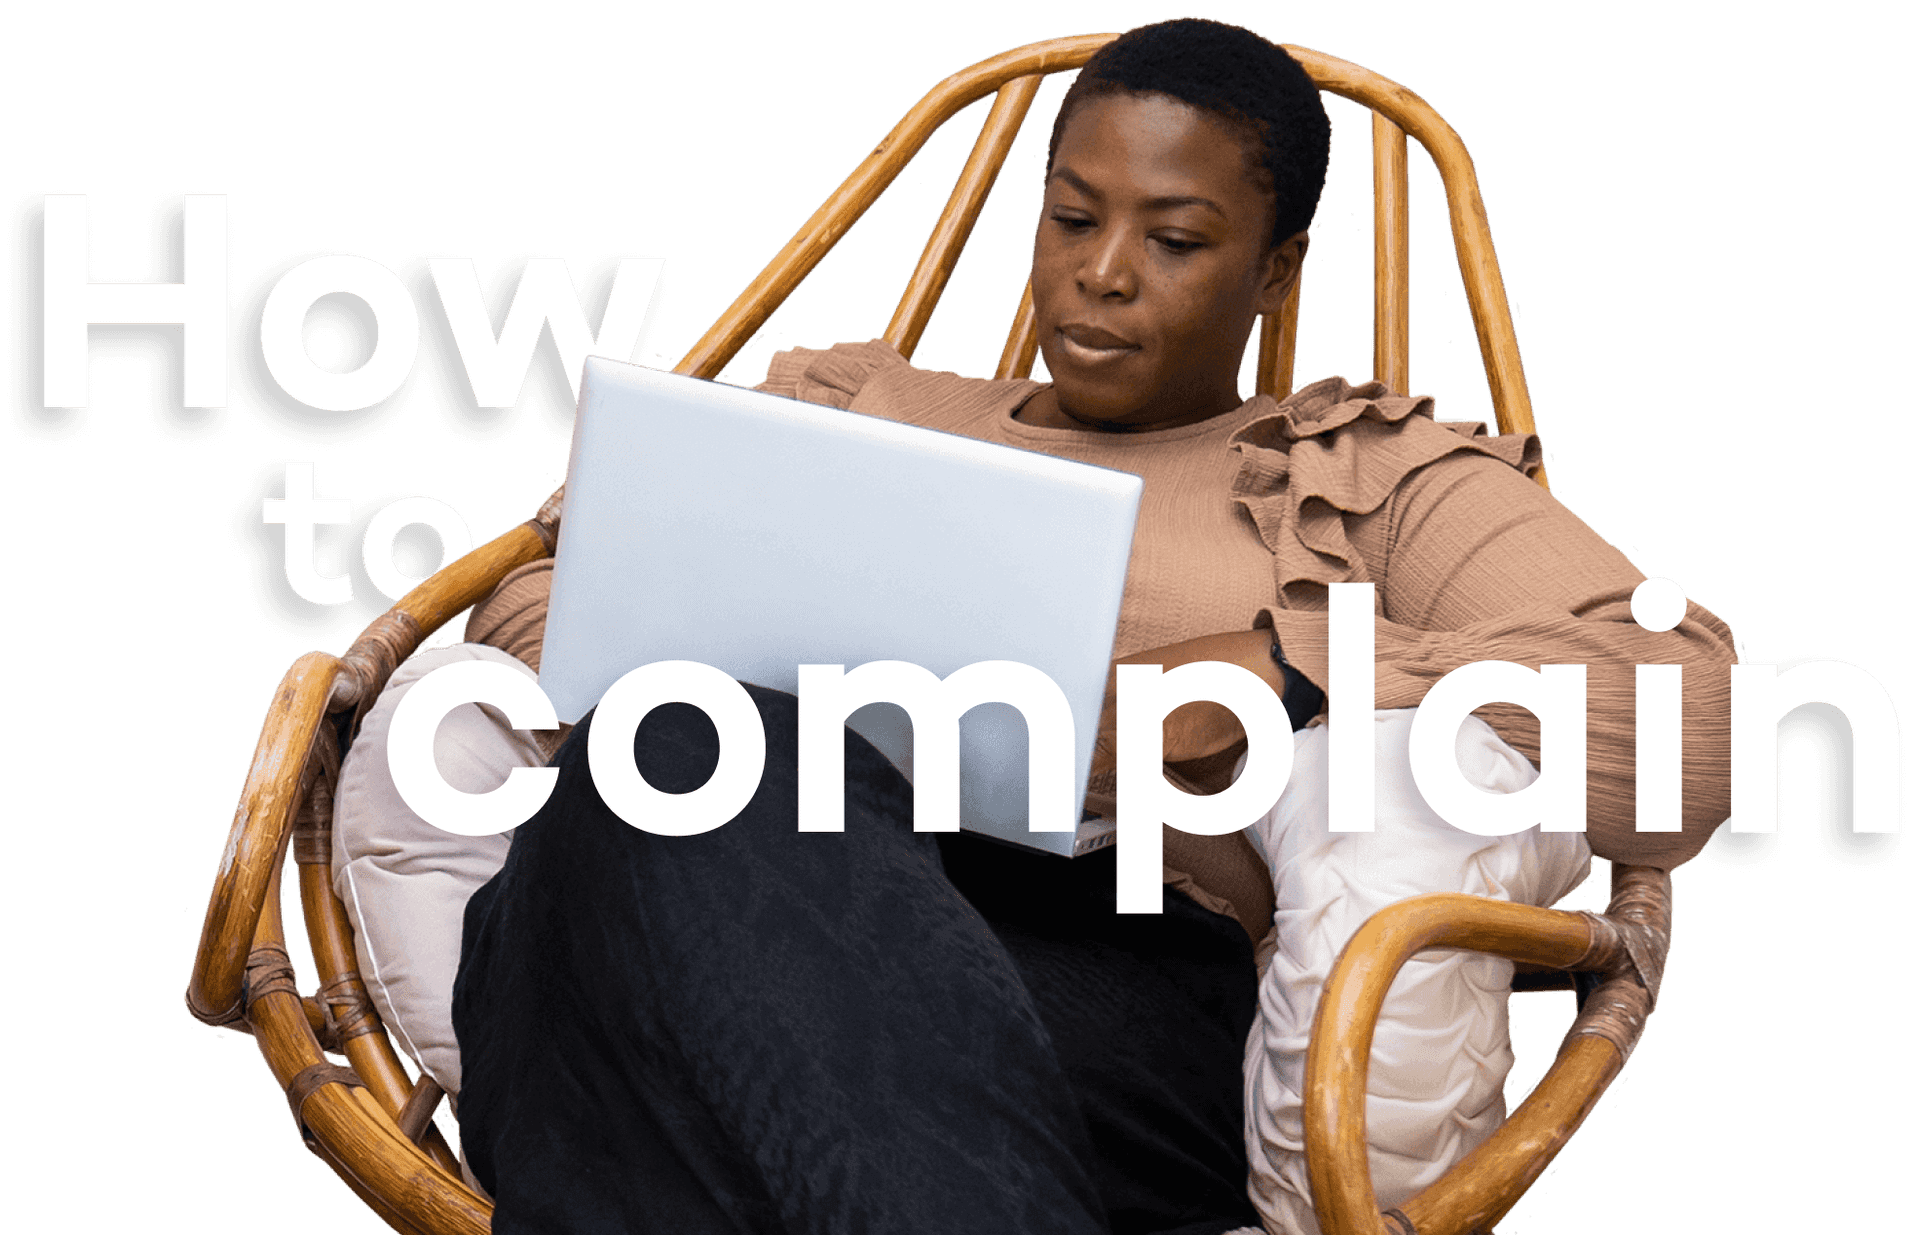 How to complain